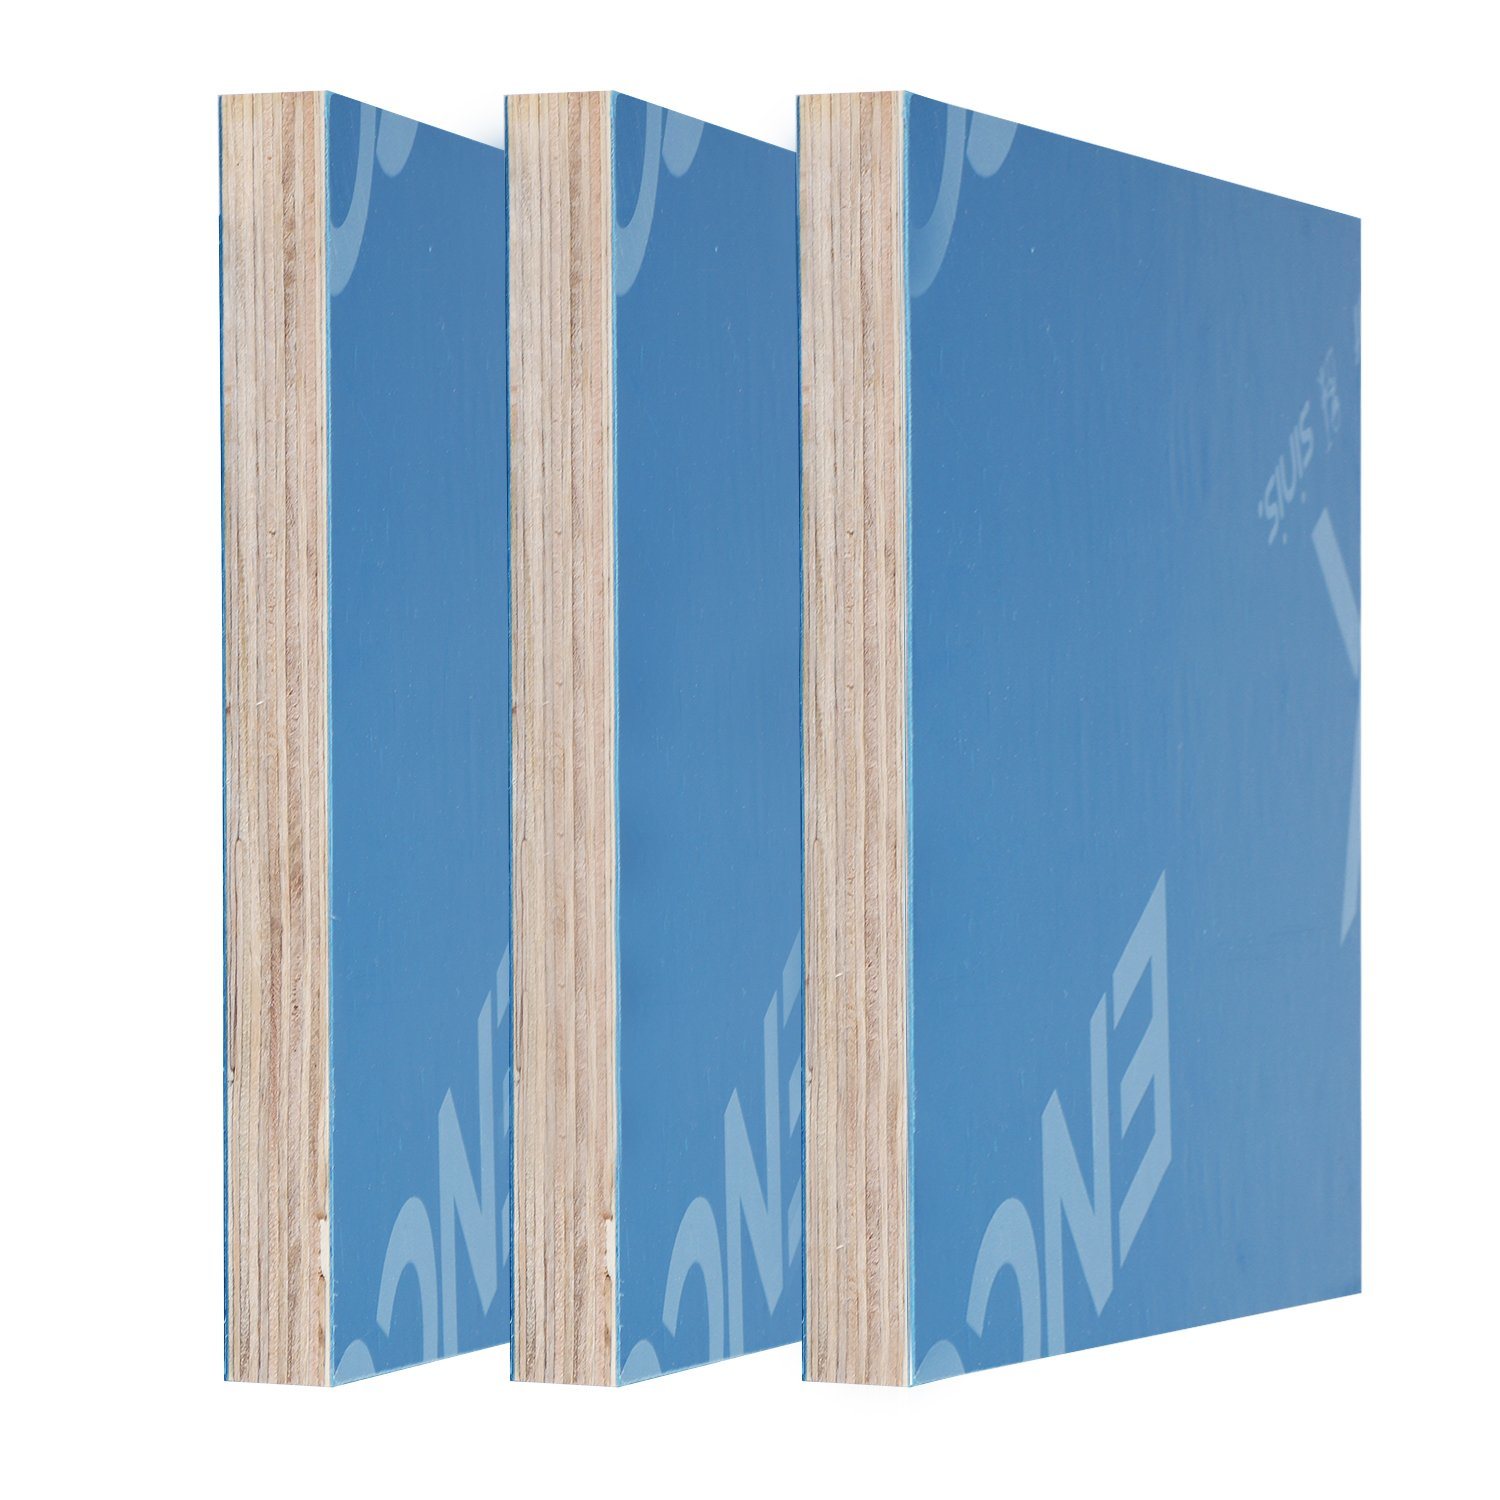 Black/Brown/Blue Film Faced Plywood, Marine Plywood, Construction Filmboard